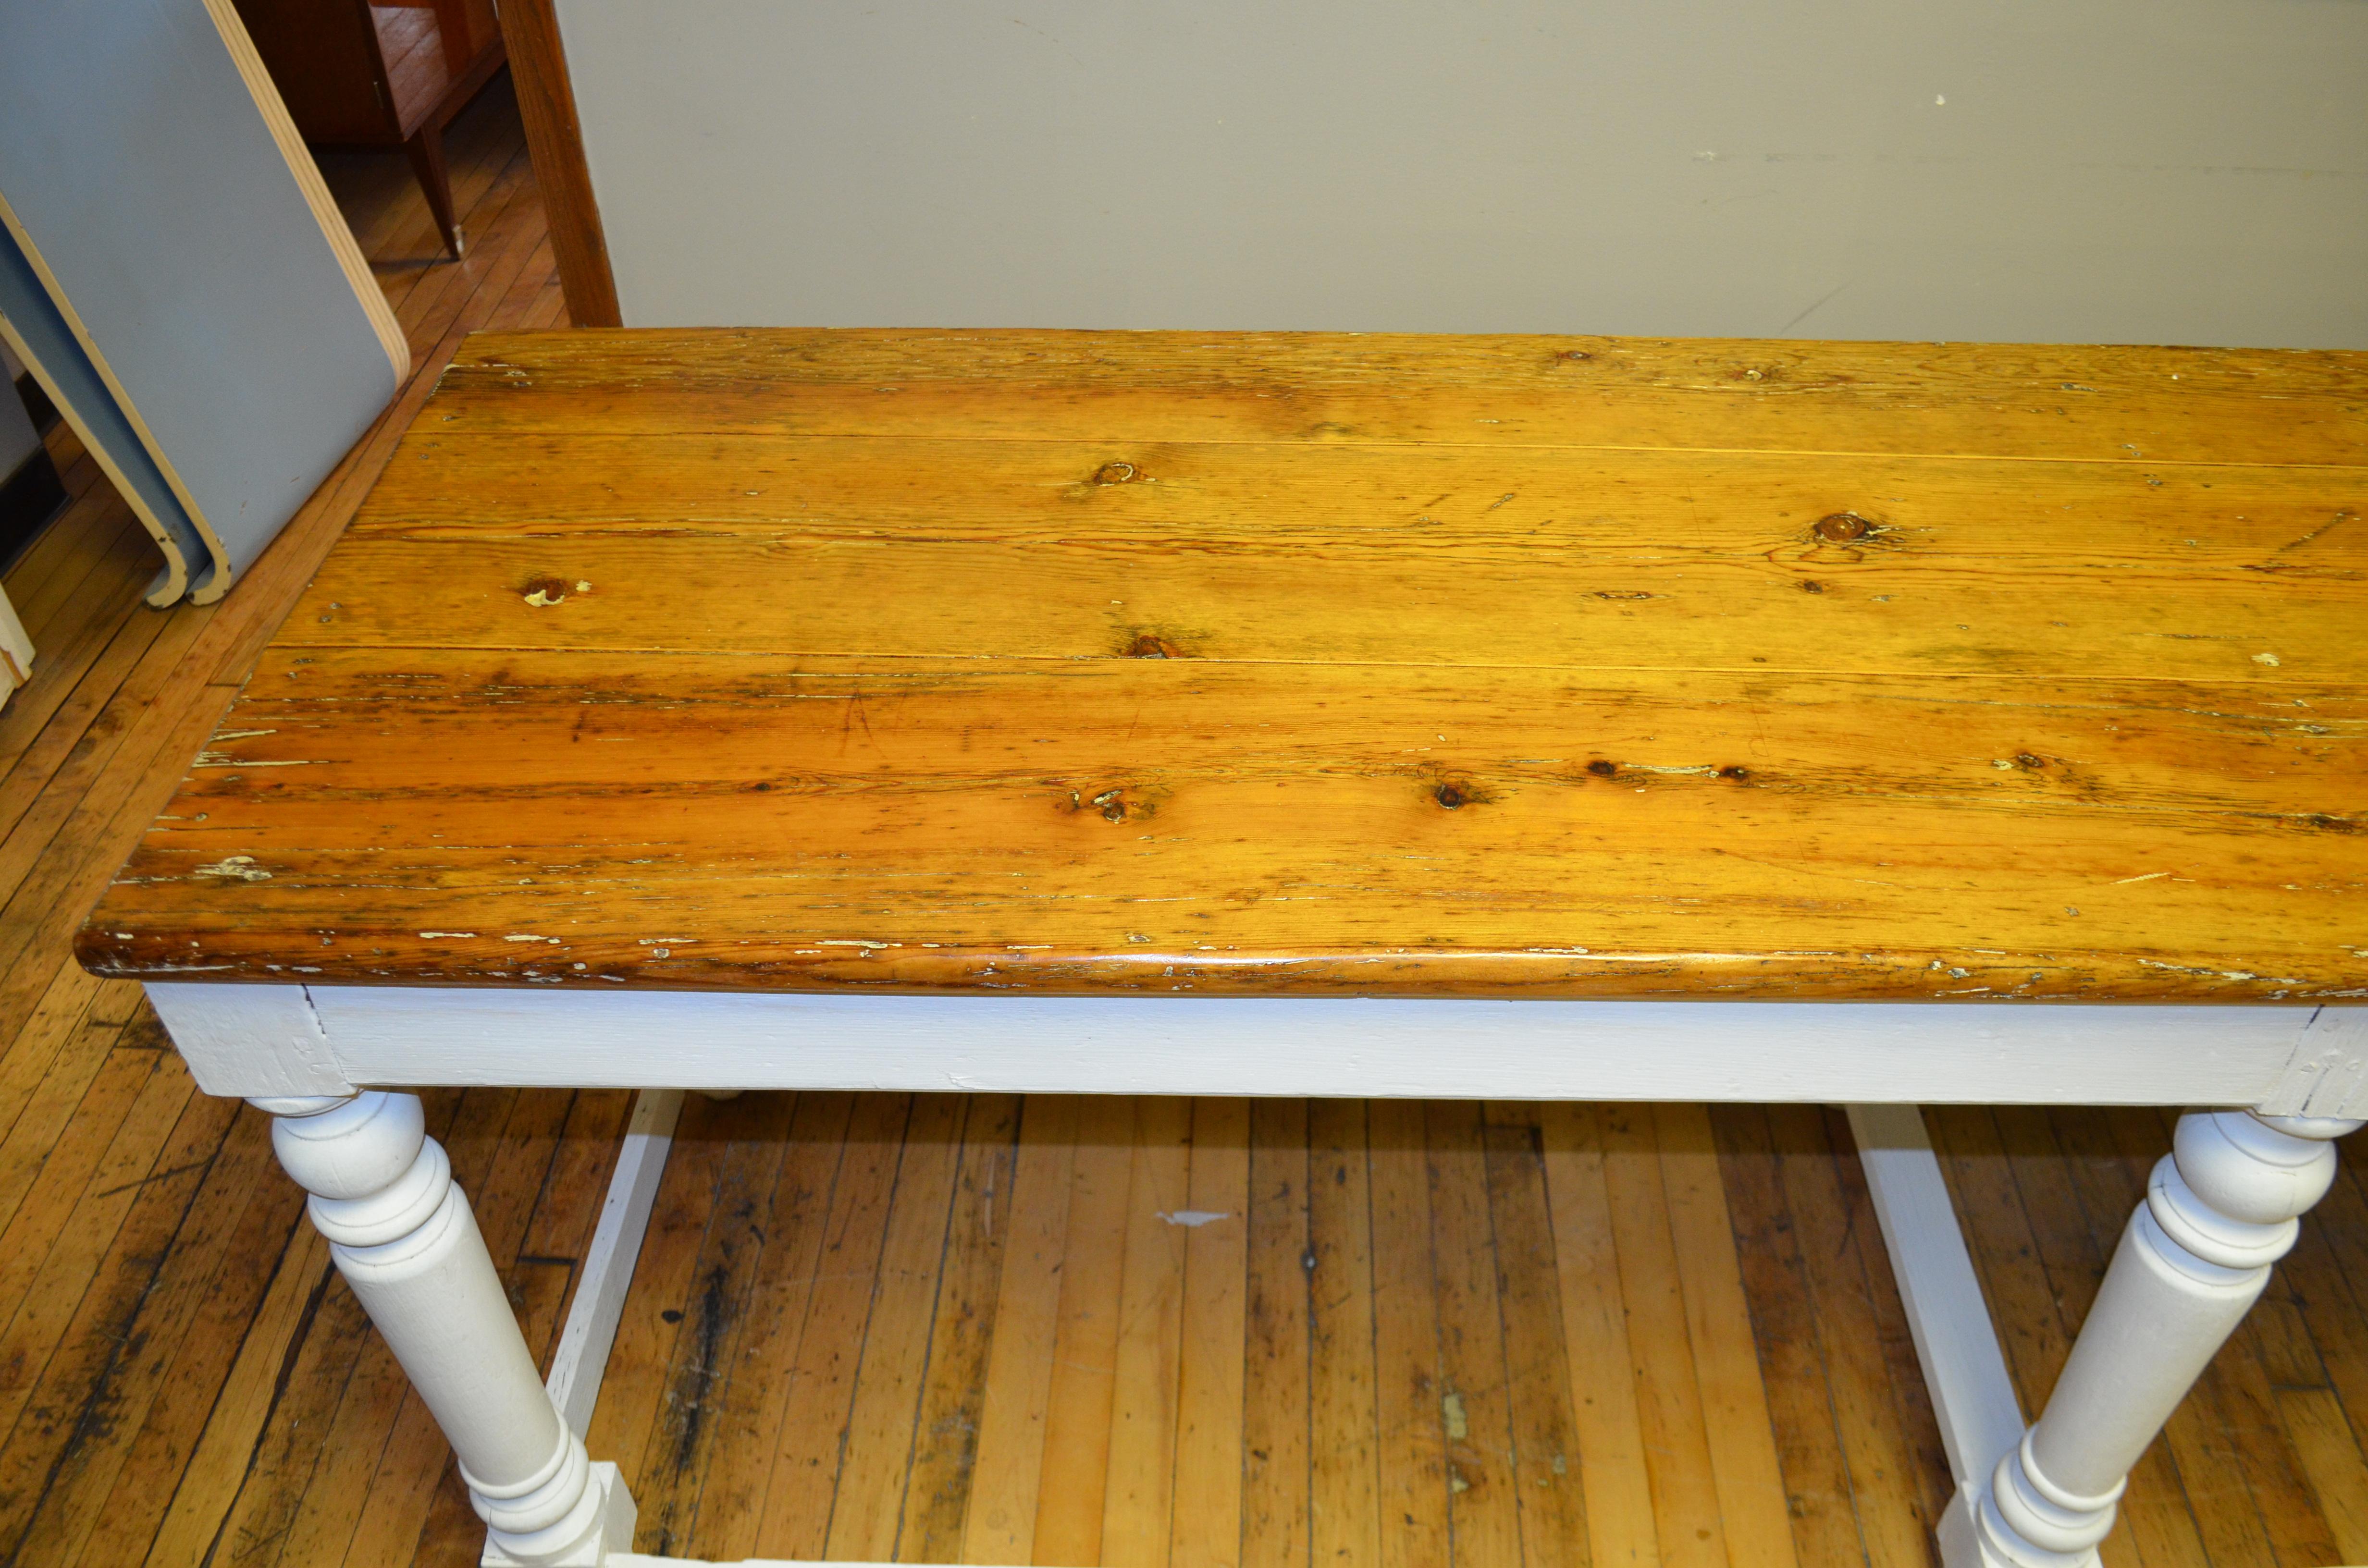 Kitchen island or restaurant prep table or centre hall, office console hails from New Orleans rectory, early 20th century. Pine board top has been refinished food safe. Supporting balustrade legs with stringers have been painted with white milk